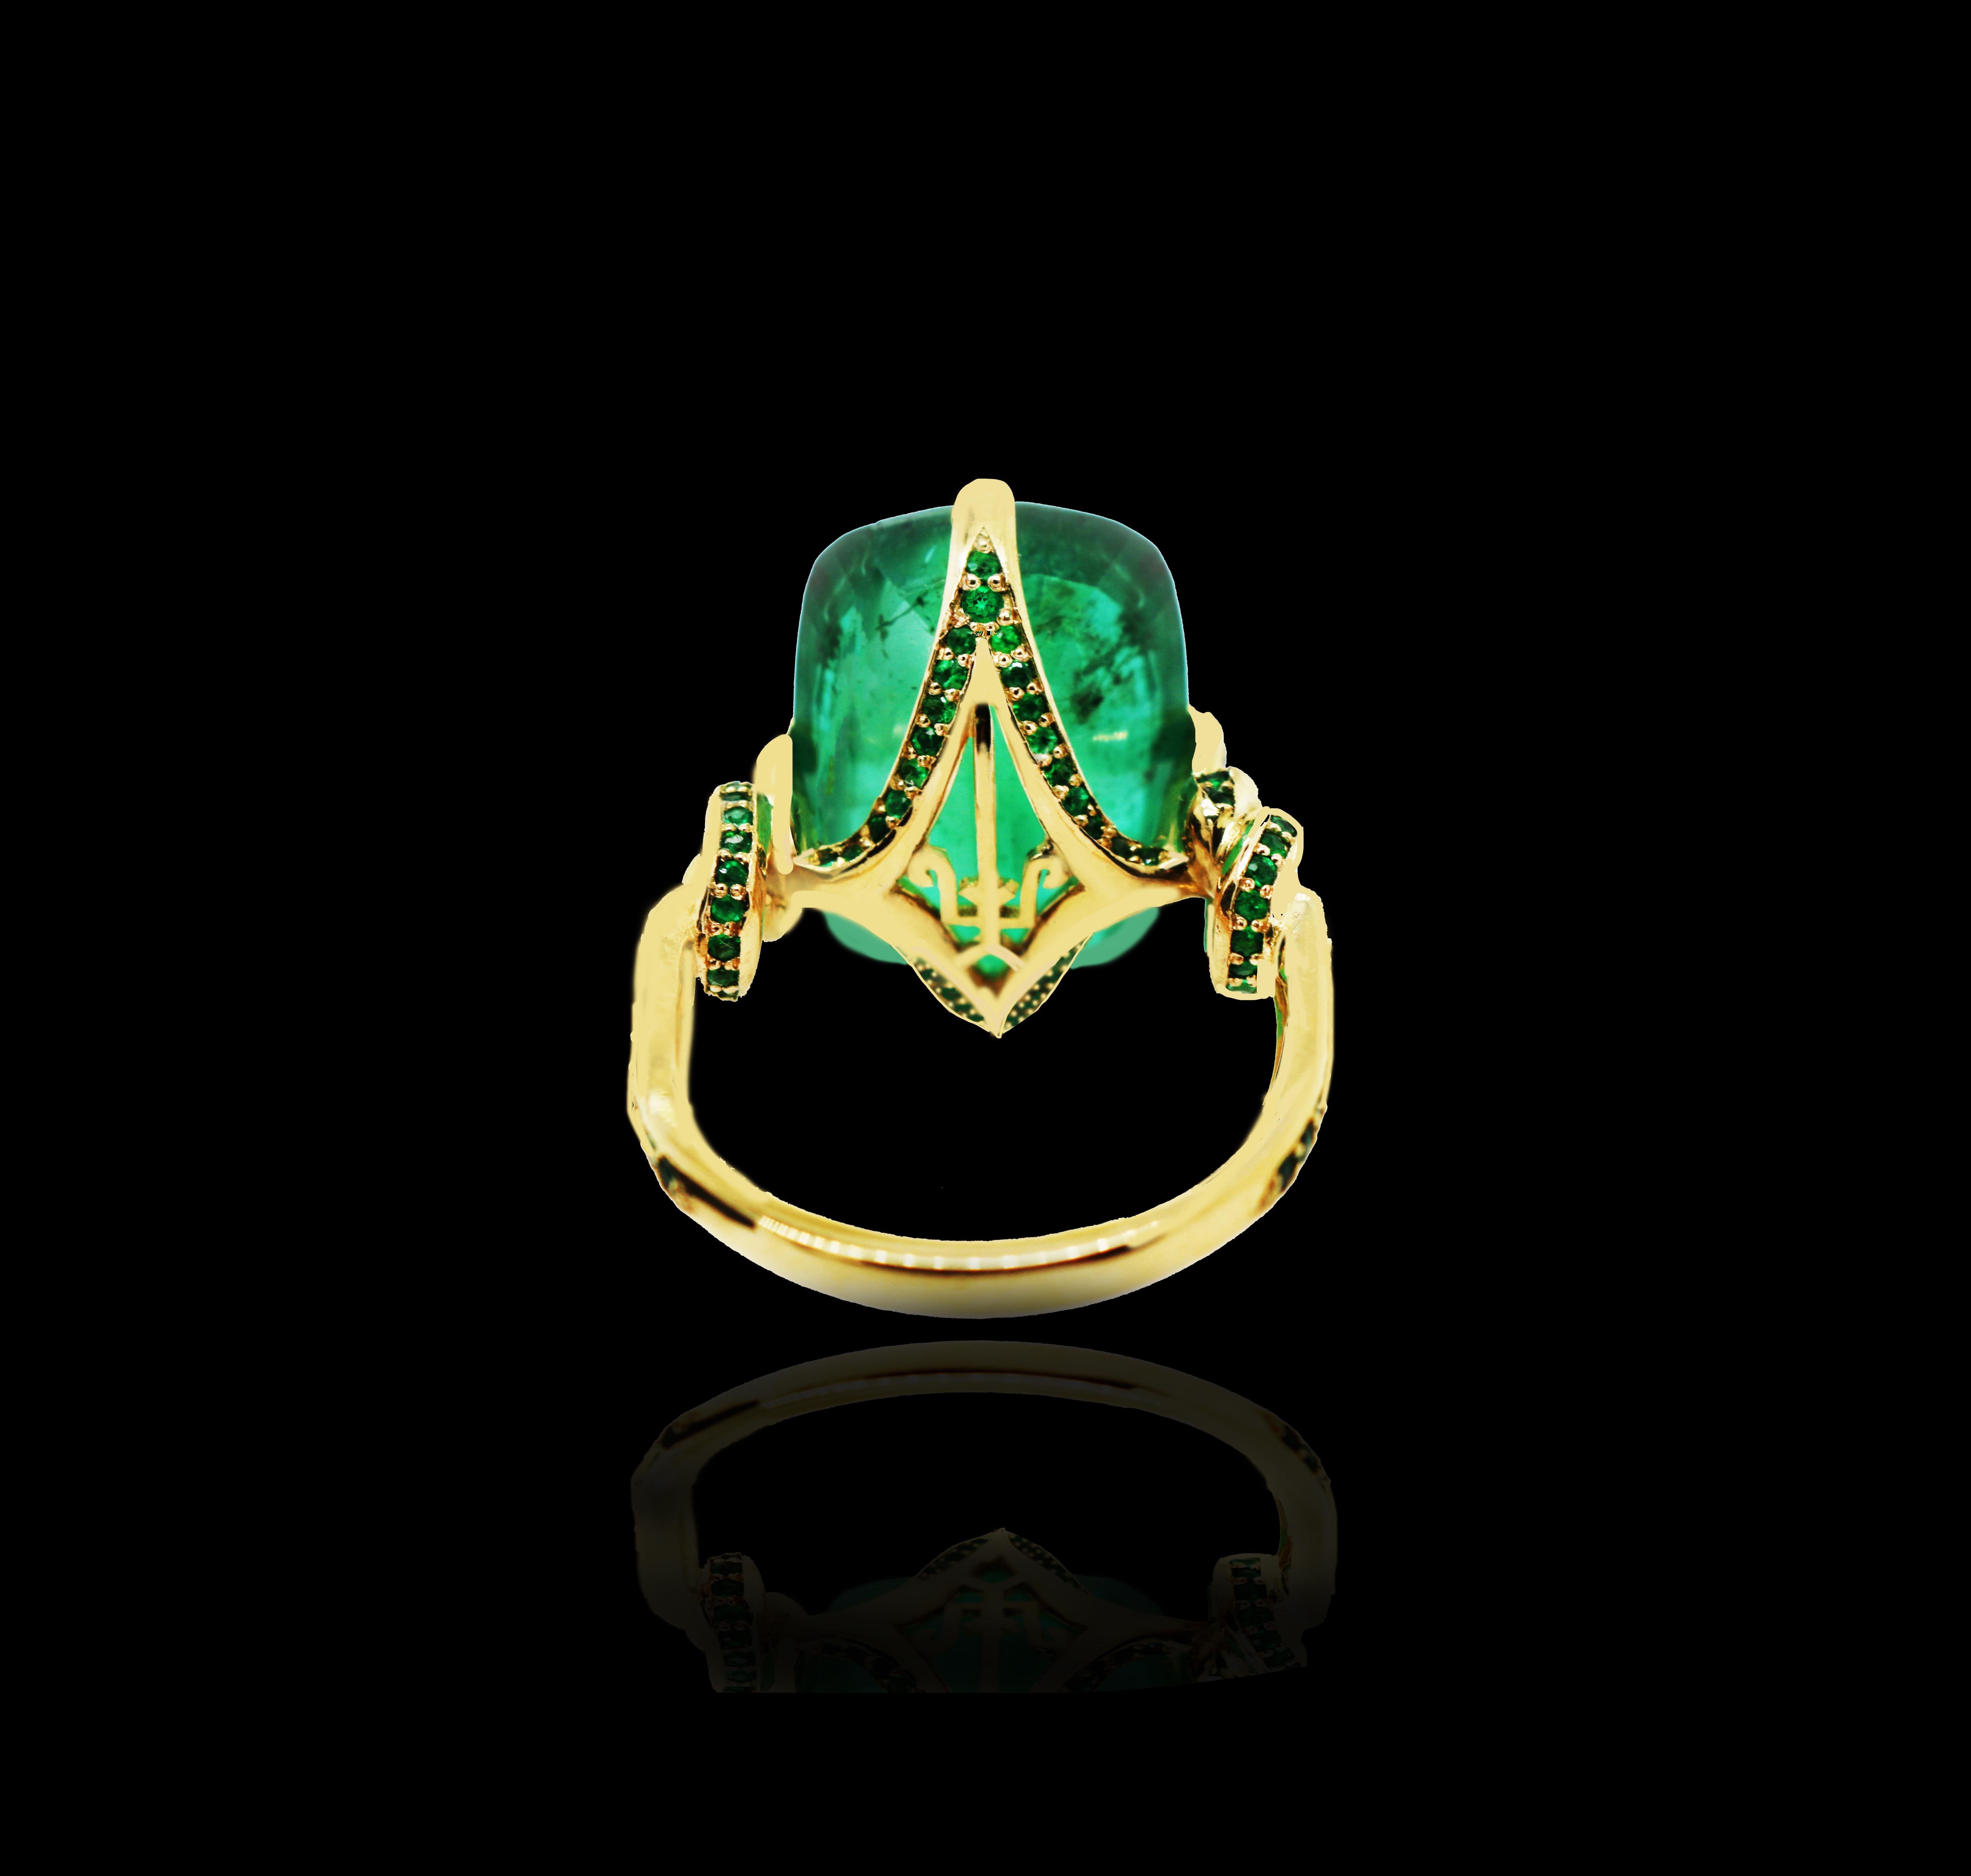 Glamorously bold and unabashedly seductive. This showstopper ring features an intense natural Emerald poised between sharp eagle style talons and embraced by powerful golden, emerald encrusted ropes, converging to two knots on either side of the